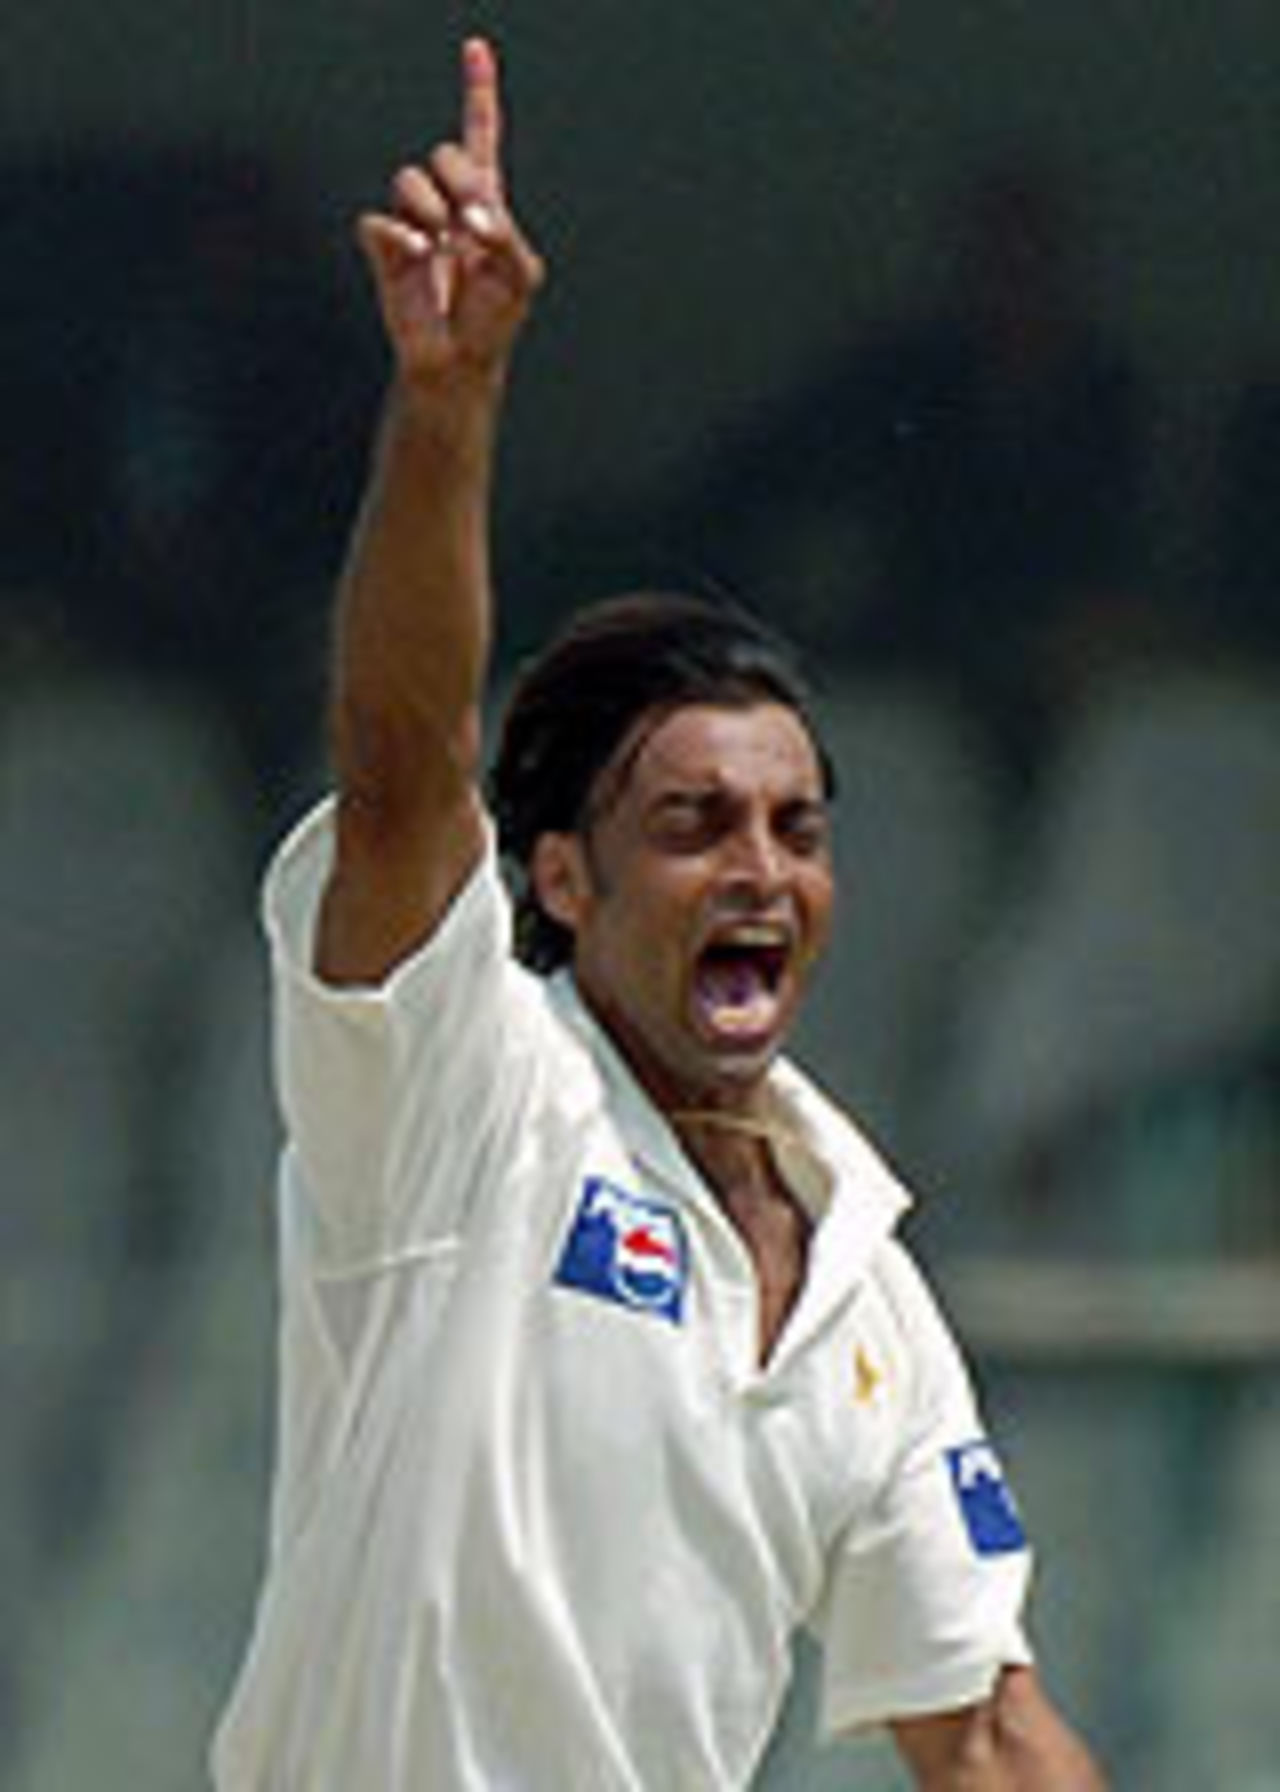 Shoaib Akhtar is delighted at dismissing Virender Sehwag, Pakistan v India, 2nd Test, Lahore, 4th day, April 8, 2004